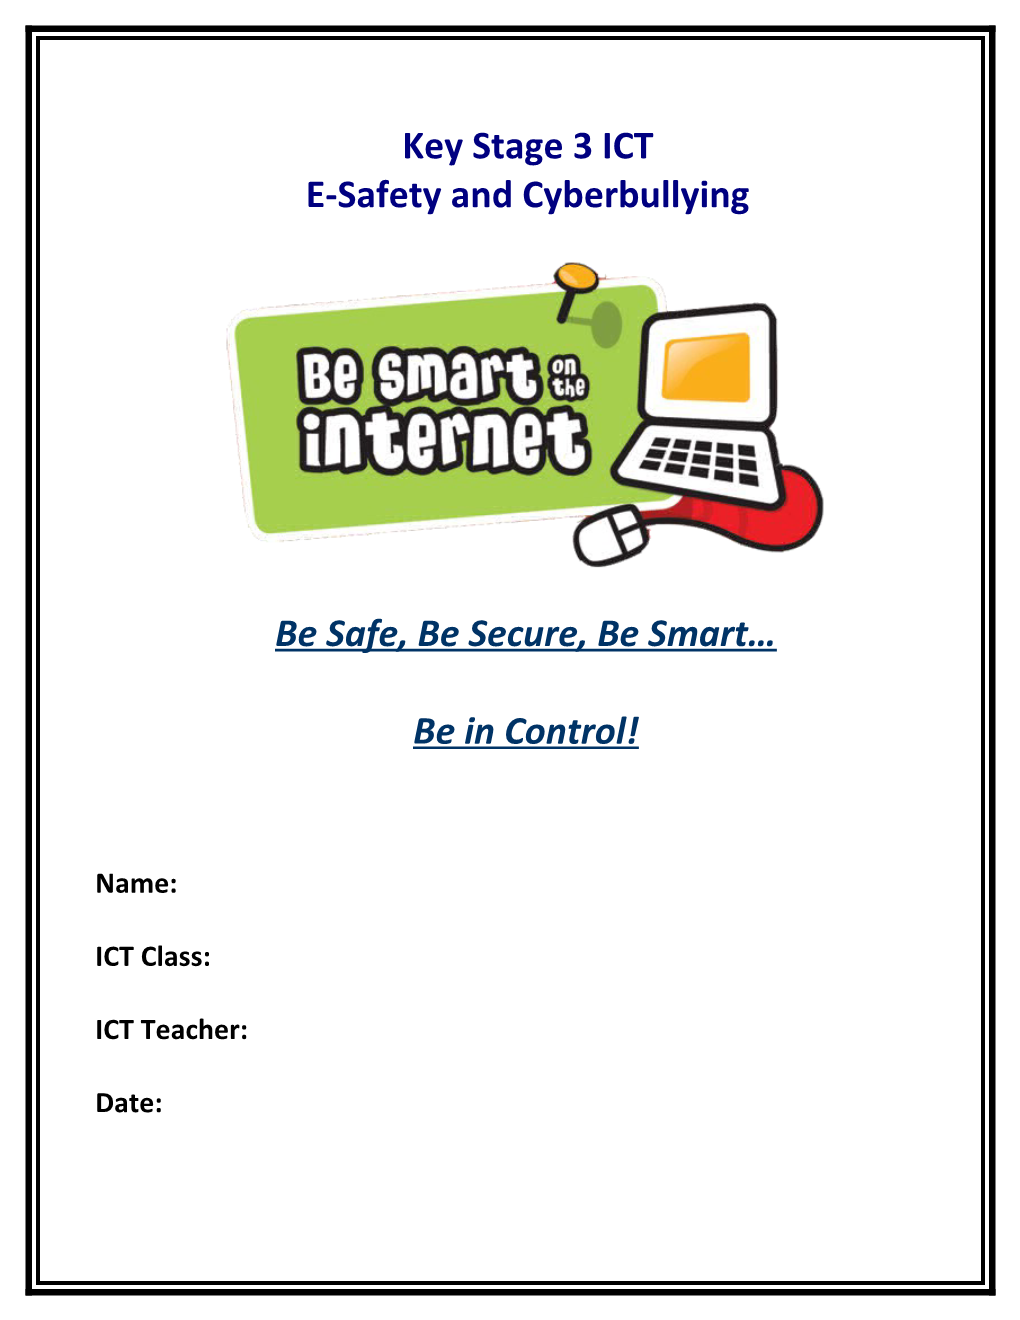 E-Safety and Cyberbullying